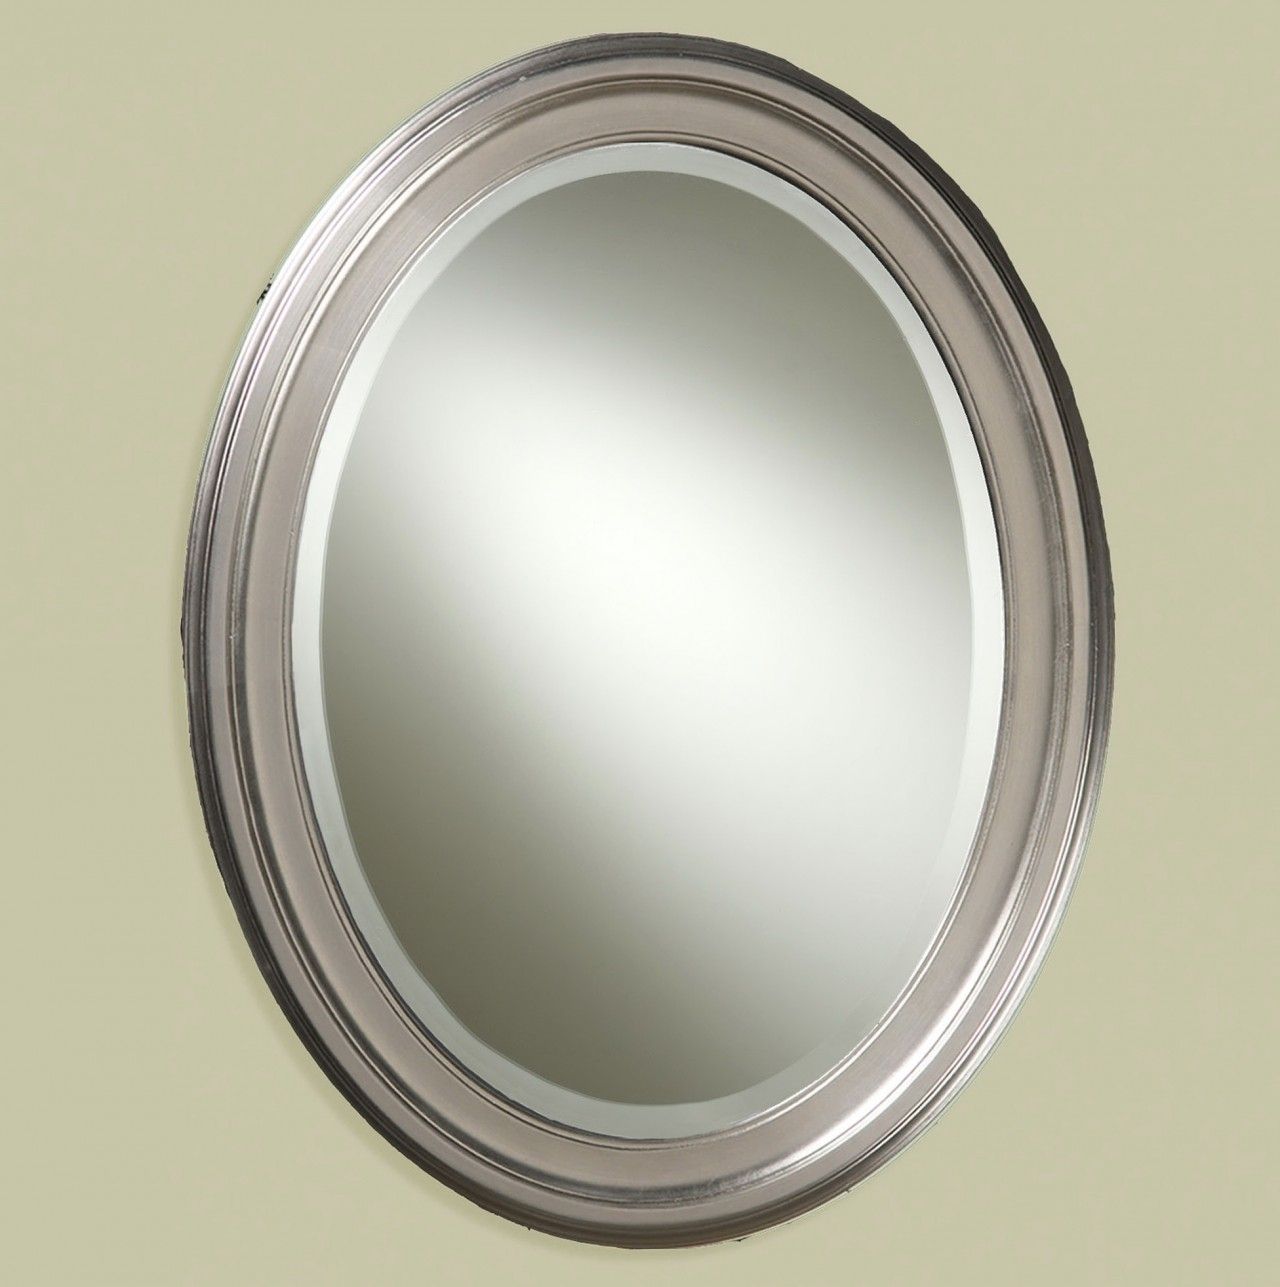 Oval Bathroom Mirrors Brushed Nickel | Home Design Ideas Intended For Polished Nickel Oval Wall Mirrors (View 13 of 15)